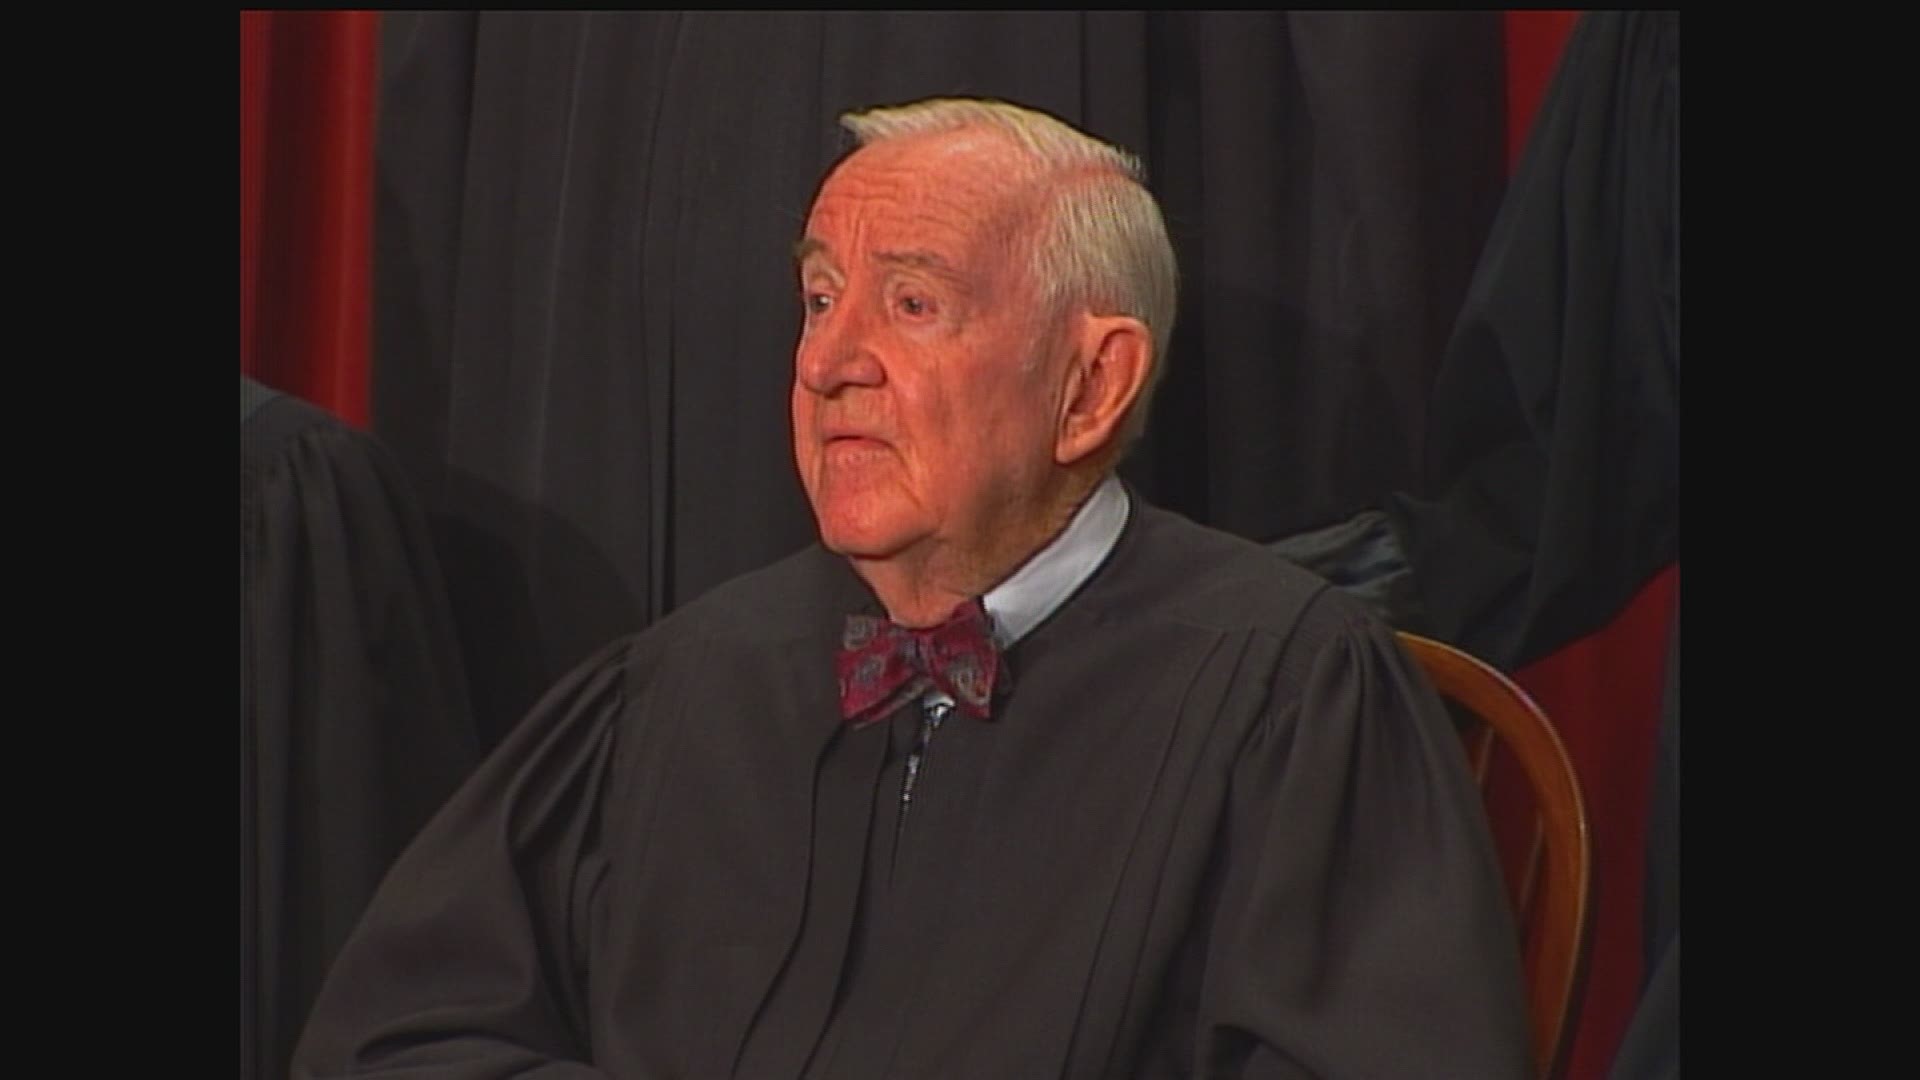 John Paul Stevens, the bow-tied, independent-thinking, Republican-nominated justice who unexpectedly emerged as the Supreme Court's leading liberal, died on Tuesday in Fort Lauderdale, Florida, after suffering a stroke on Monday.